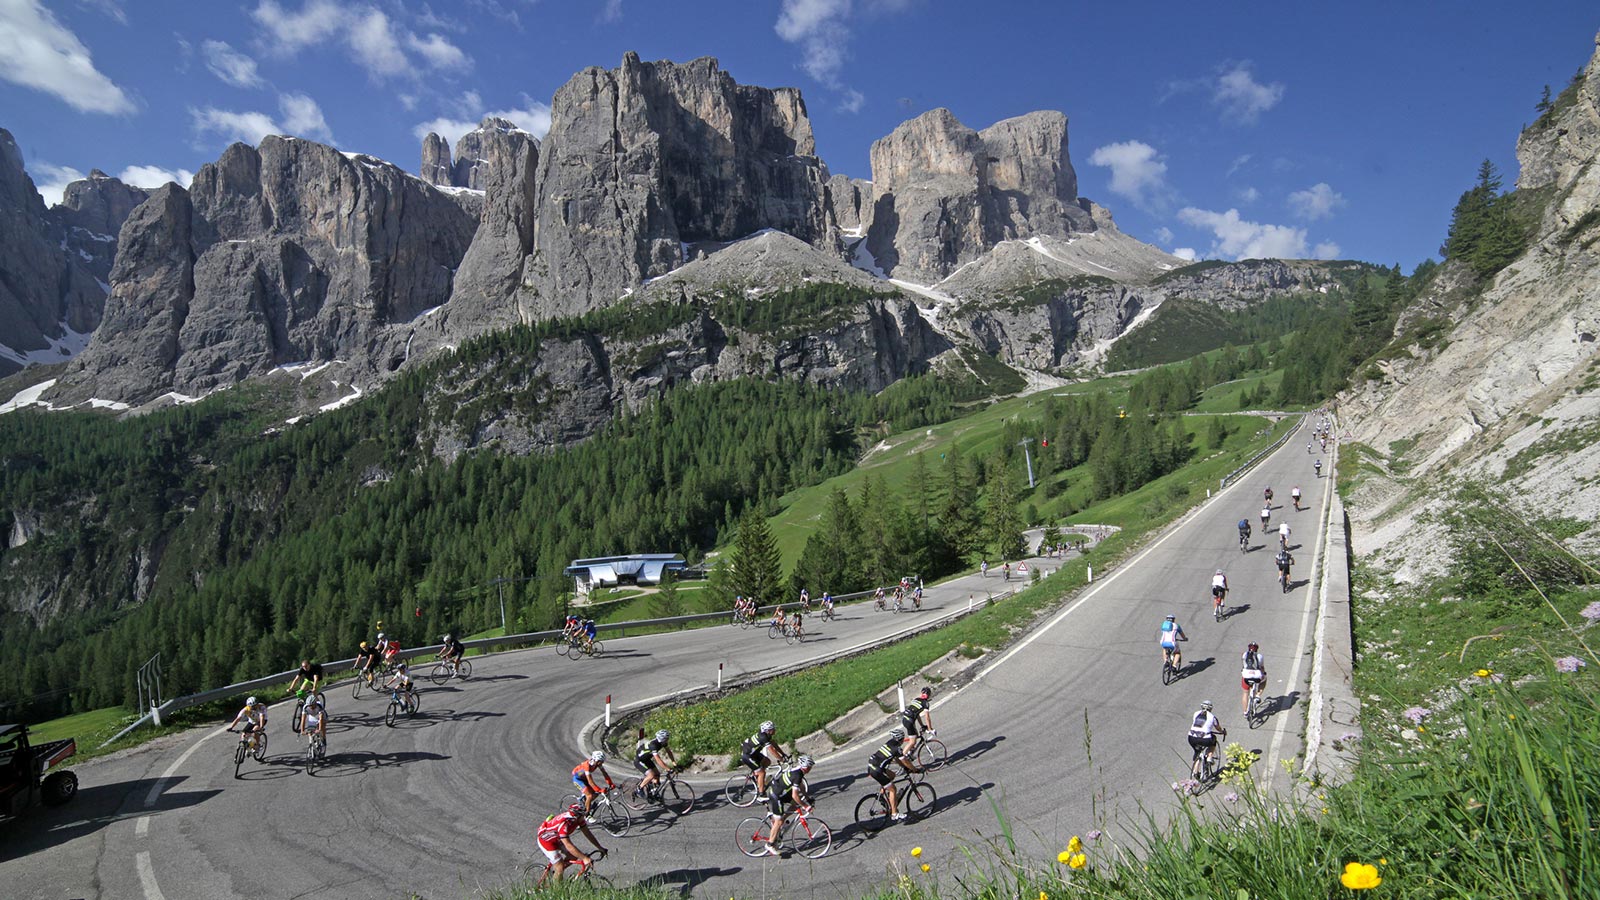 Some bikers along the road at Passo Campolongo